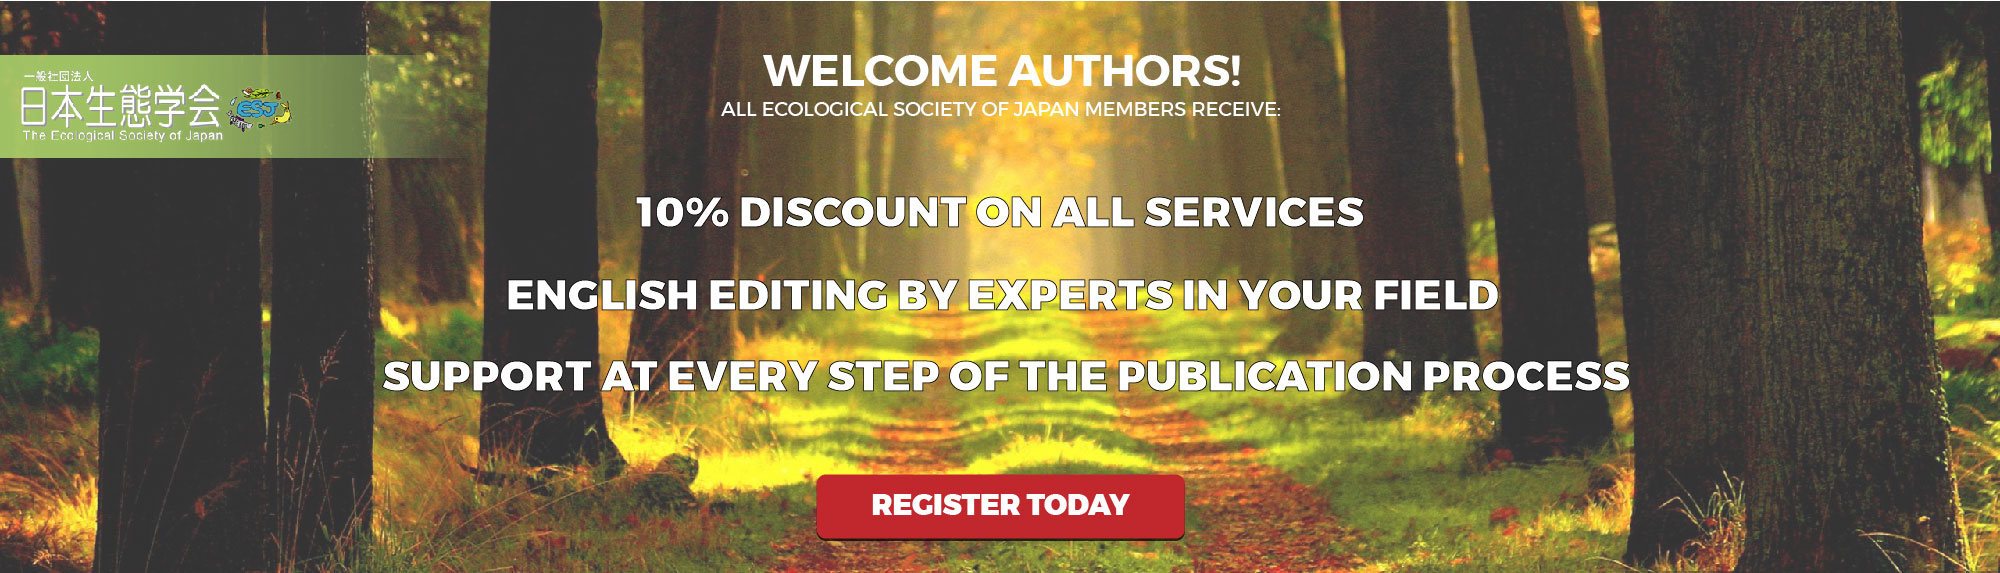 Welcome Ecological Society of Japan Members